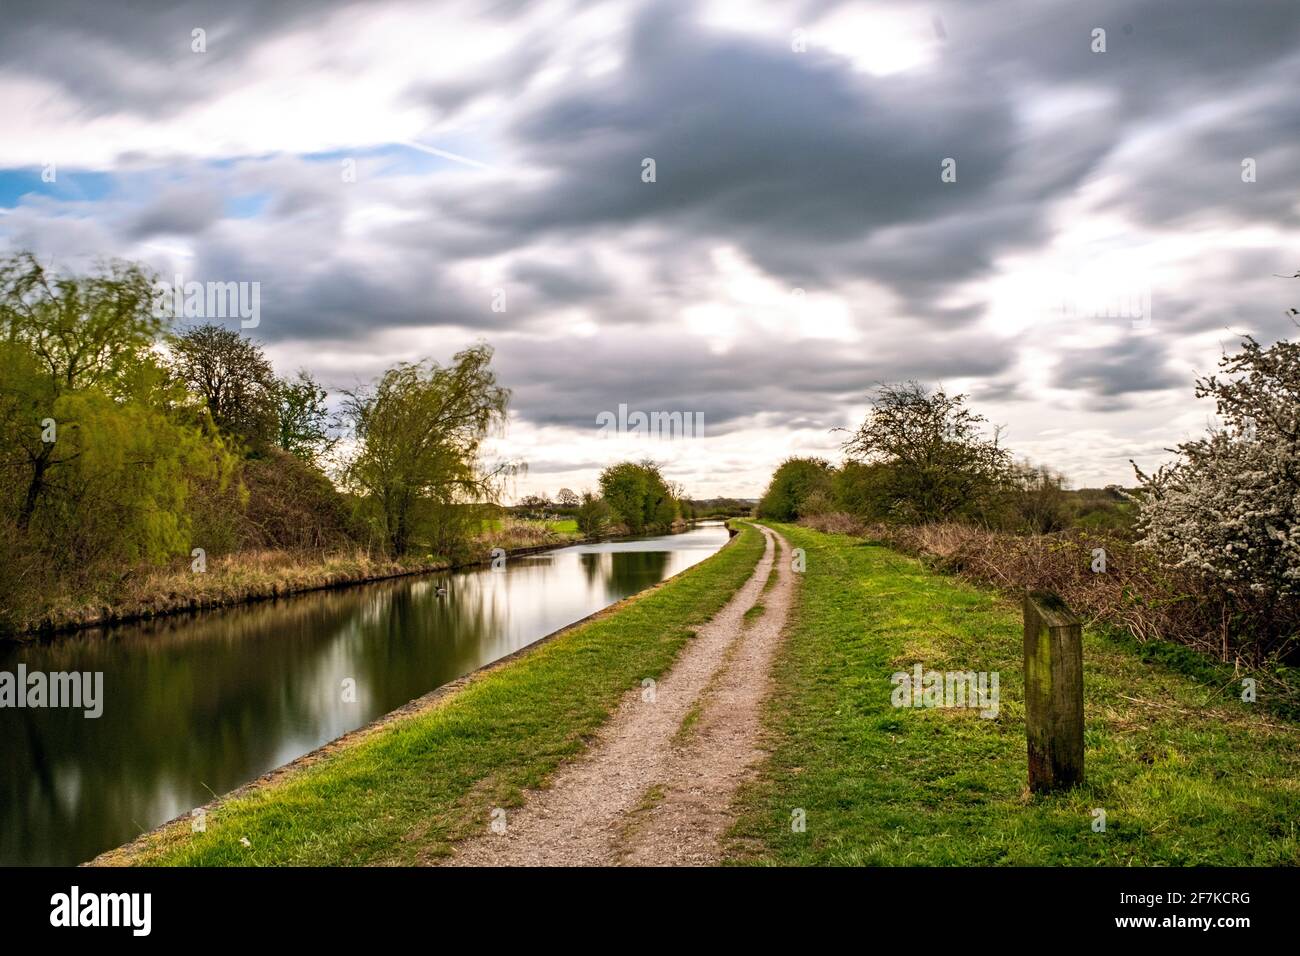 Deserted Trent and Mersey canal in Elworth near Sandbach Cheshire UK Stock Photo